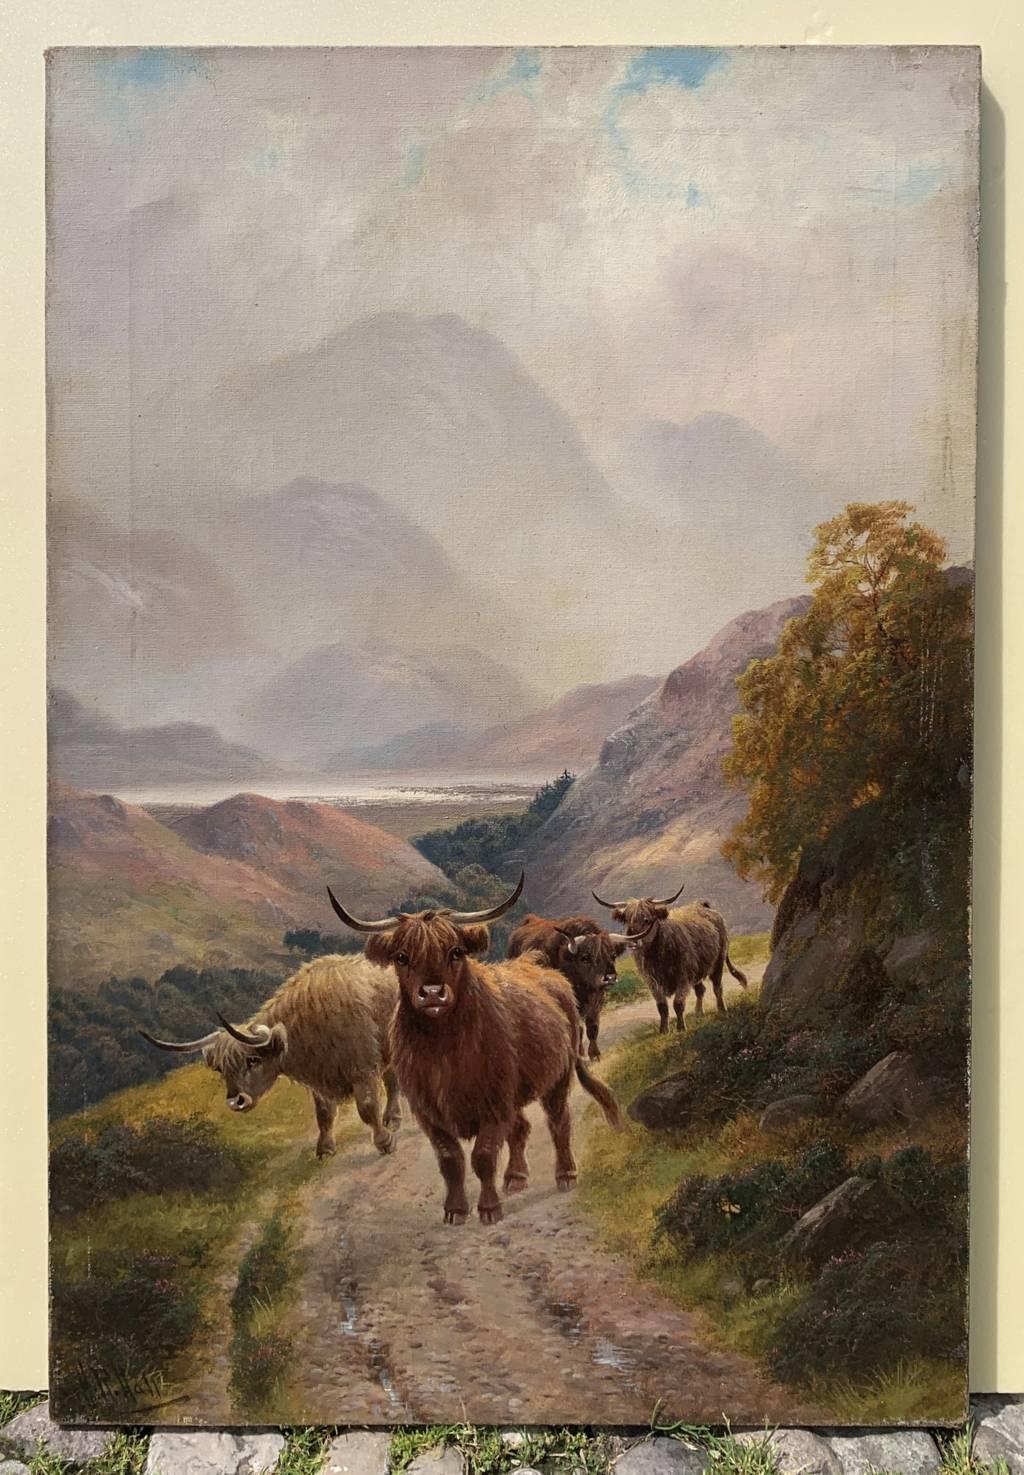 Harald R. Hall (British, 1866 - 1902) - Highlander herd along trail.

77 x 51 cm.

Antique oil painting on canvas, without frame.

- Work signed bottom left: “H. R. Hall”.

- Work inscribed on the back: “Highland Ramblers.. H.R.Hall”.

Condition